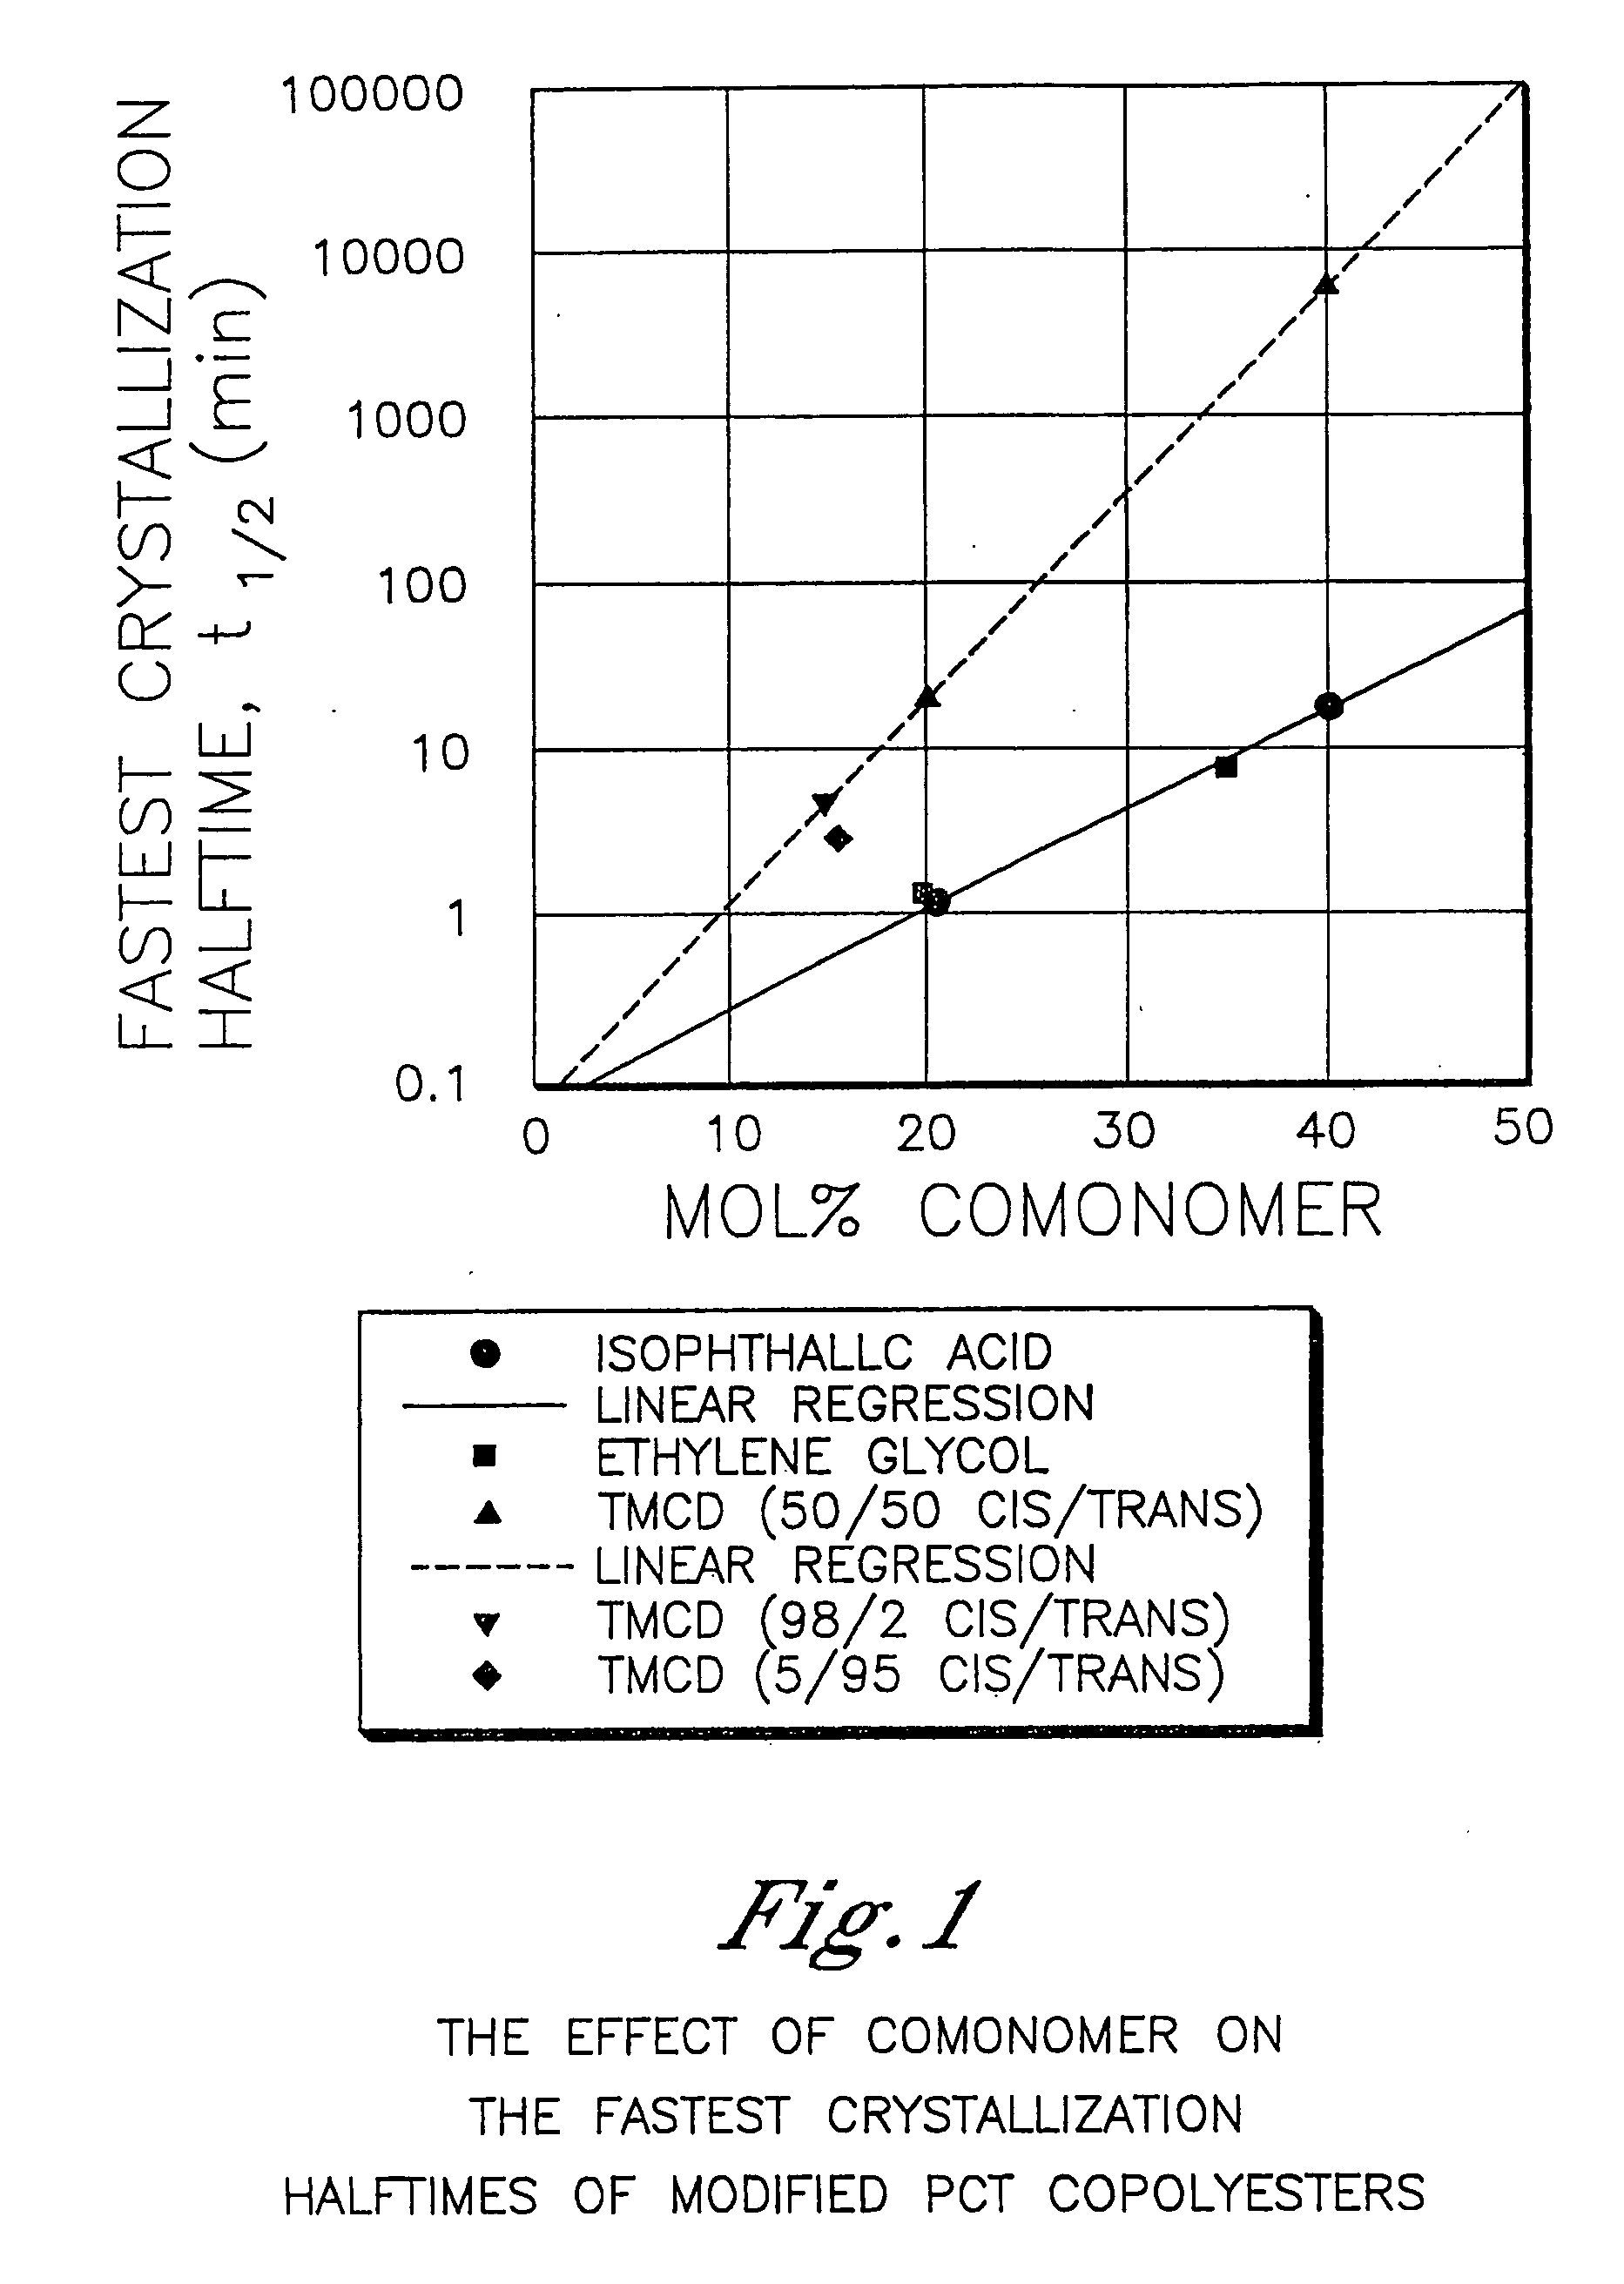 Polyester compositions containing cyclobutanediol having a certain combination of inherent viscosity and moderate glass transition temperature and articles made therefrom